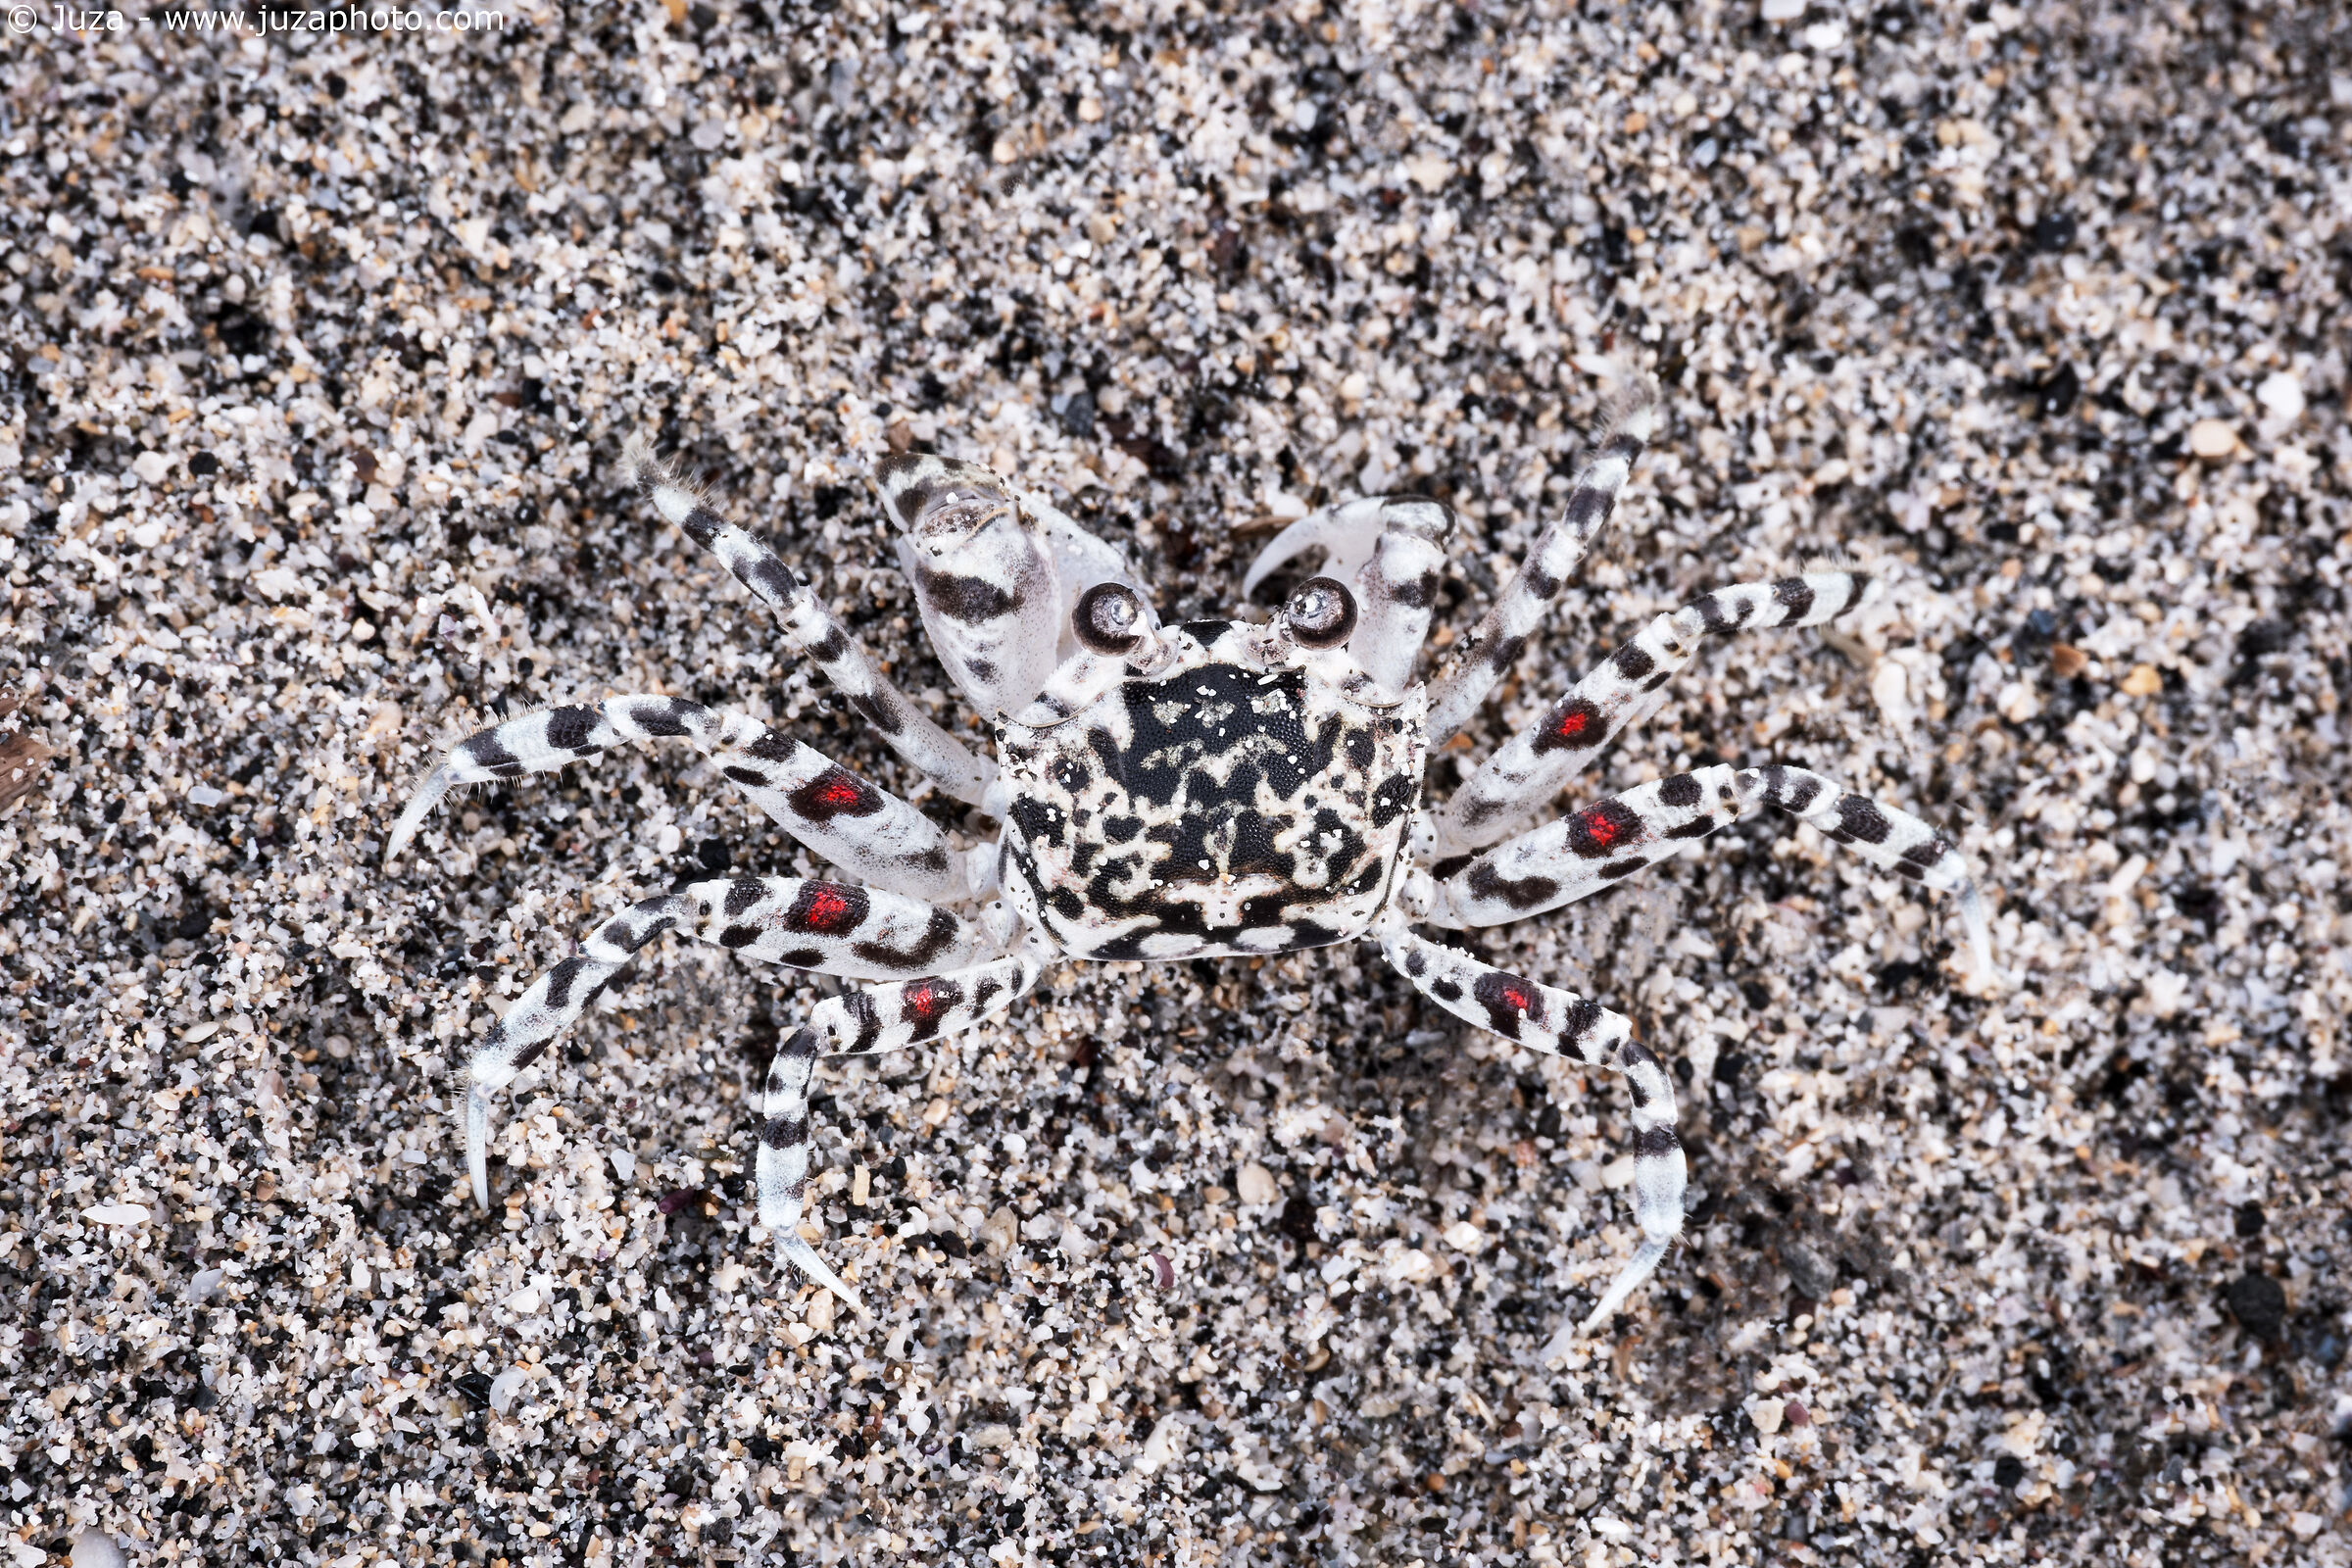 The camouflage of the crab (Ocypode pallidula)...